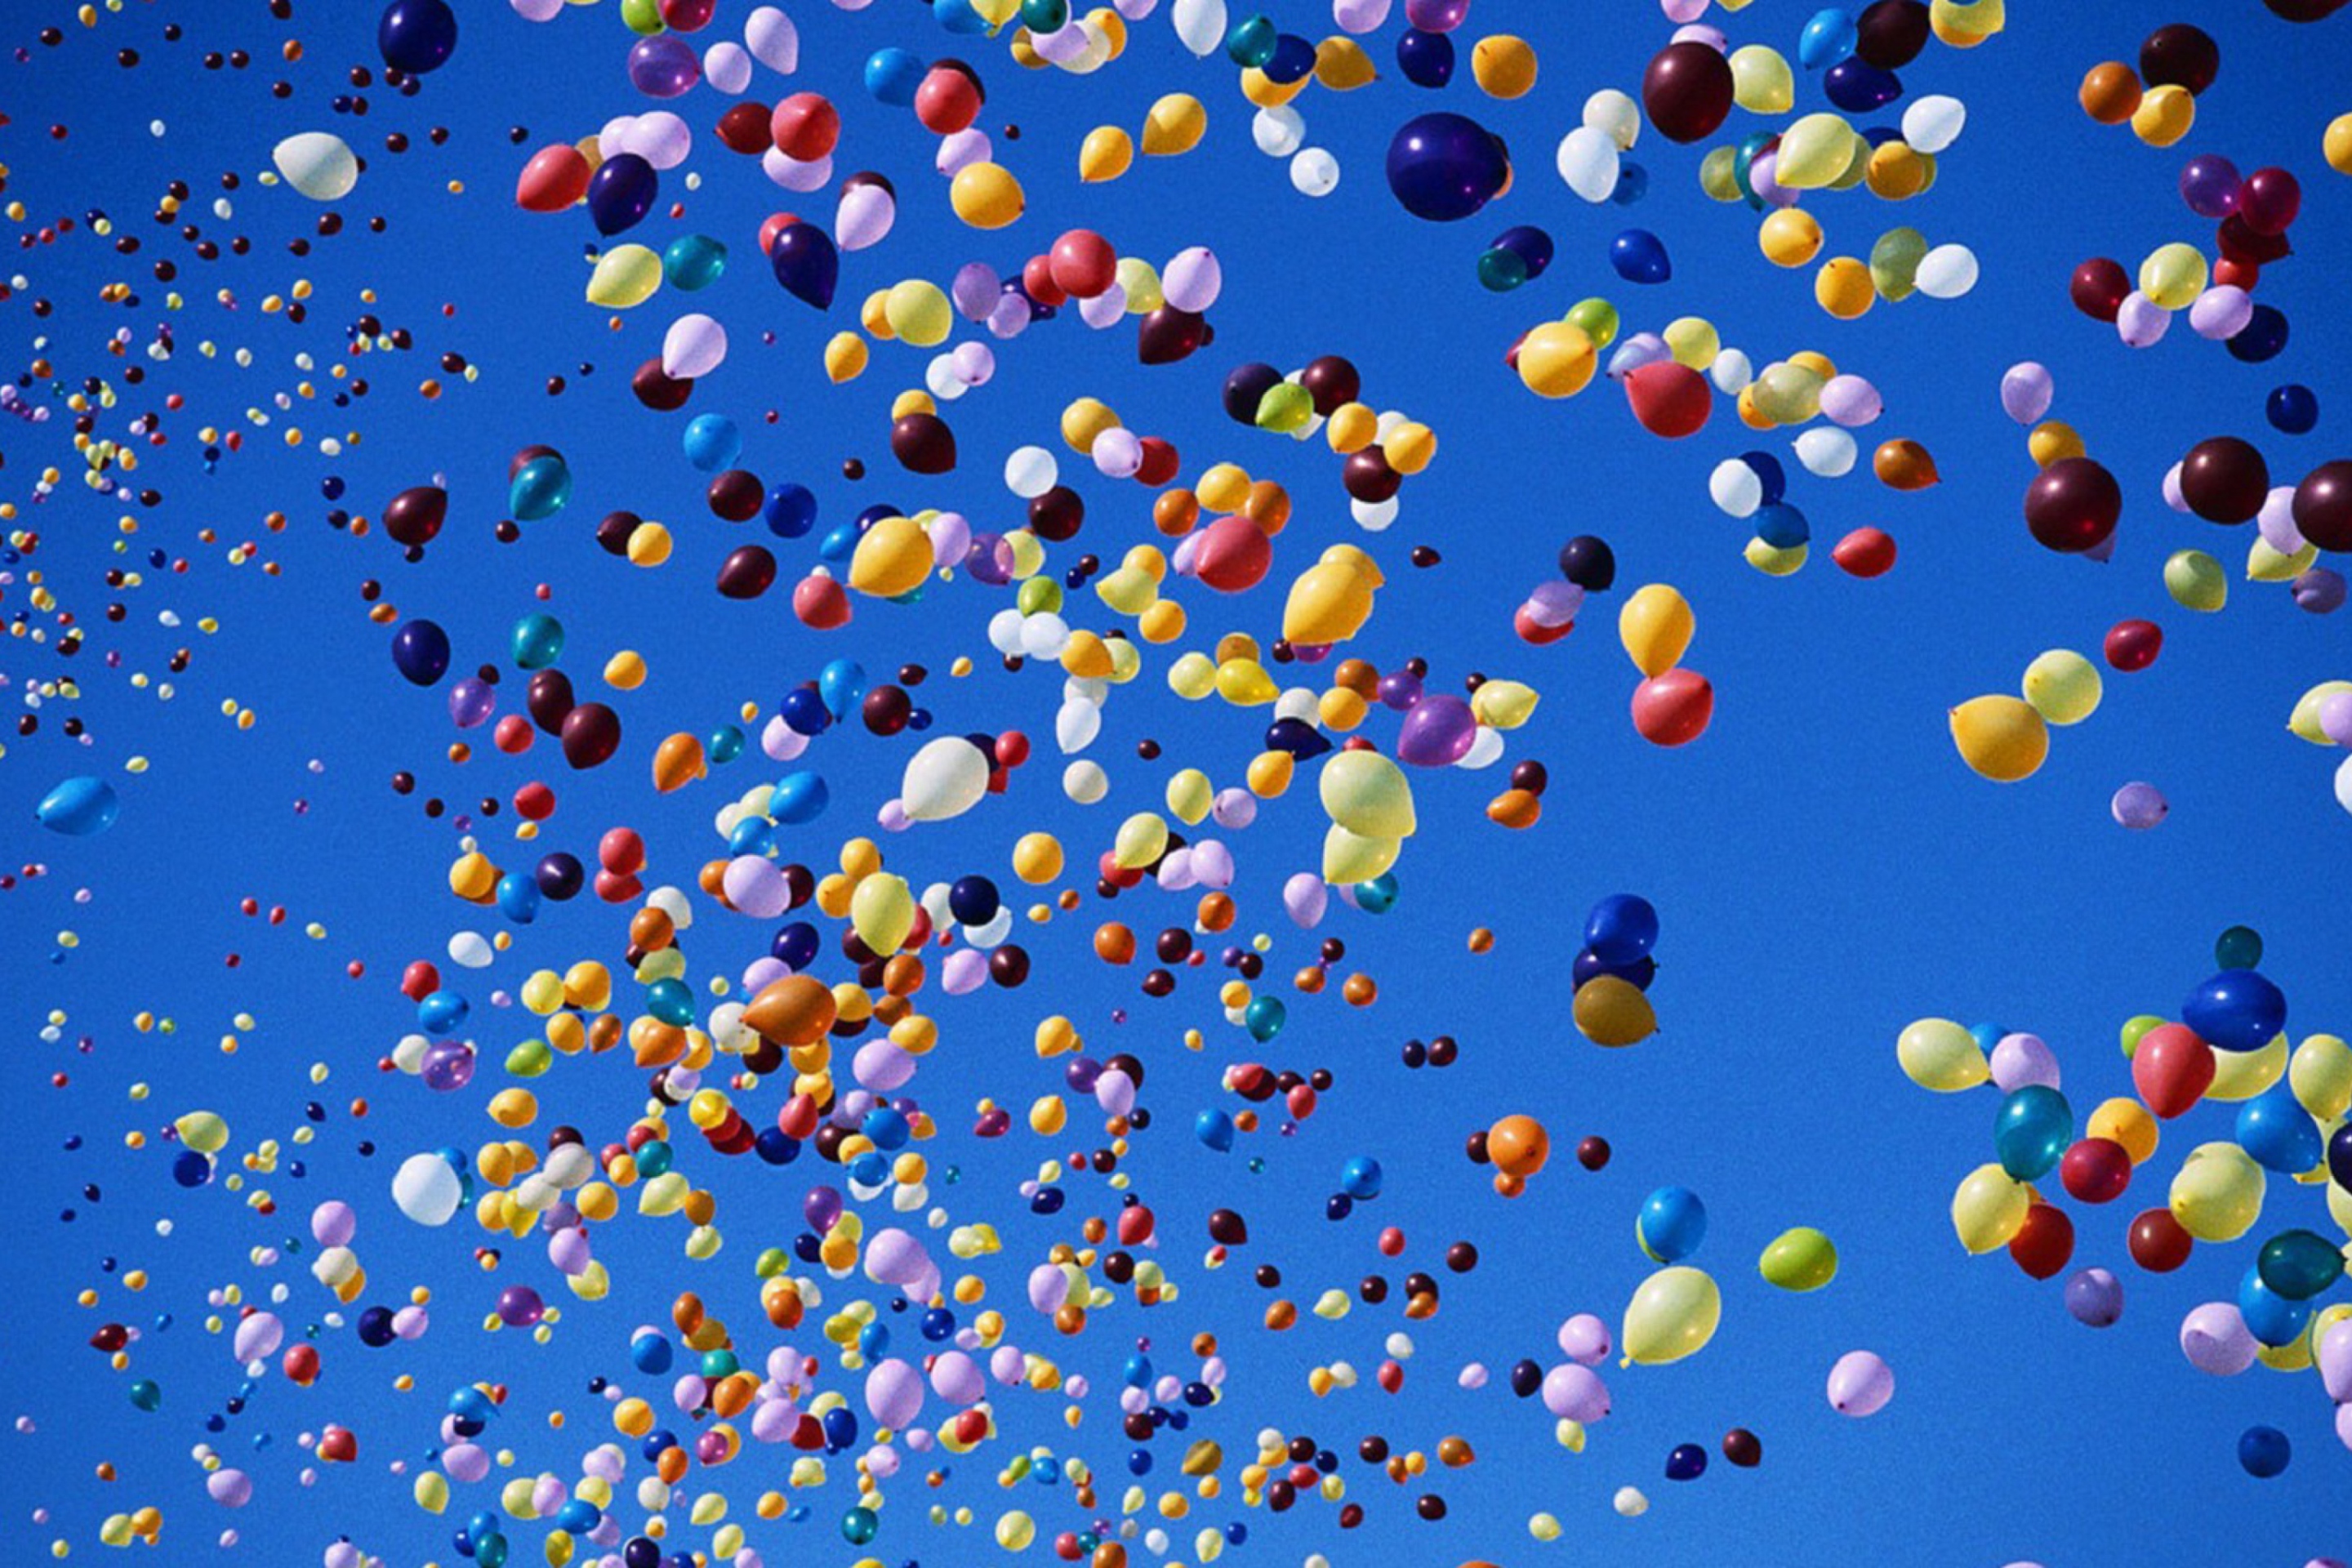 Colorful Balloons In Blue Sky screenshot #1 2880x1920